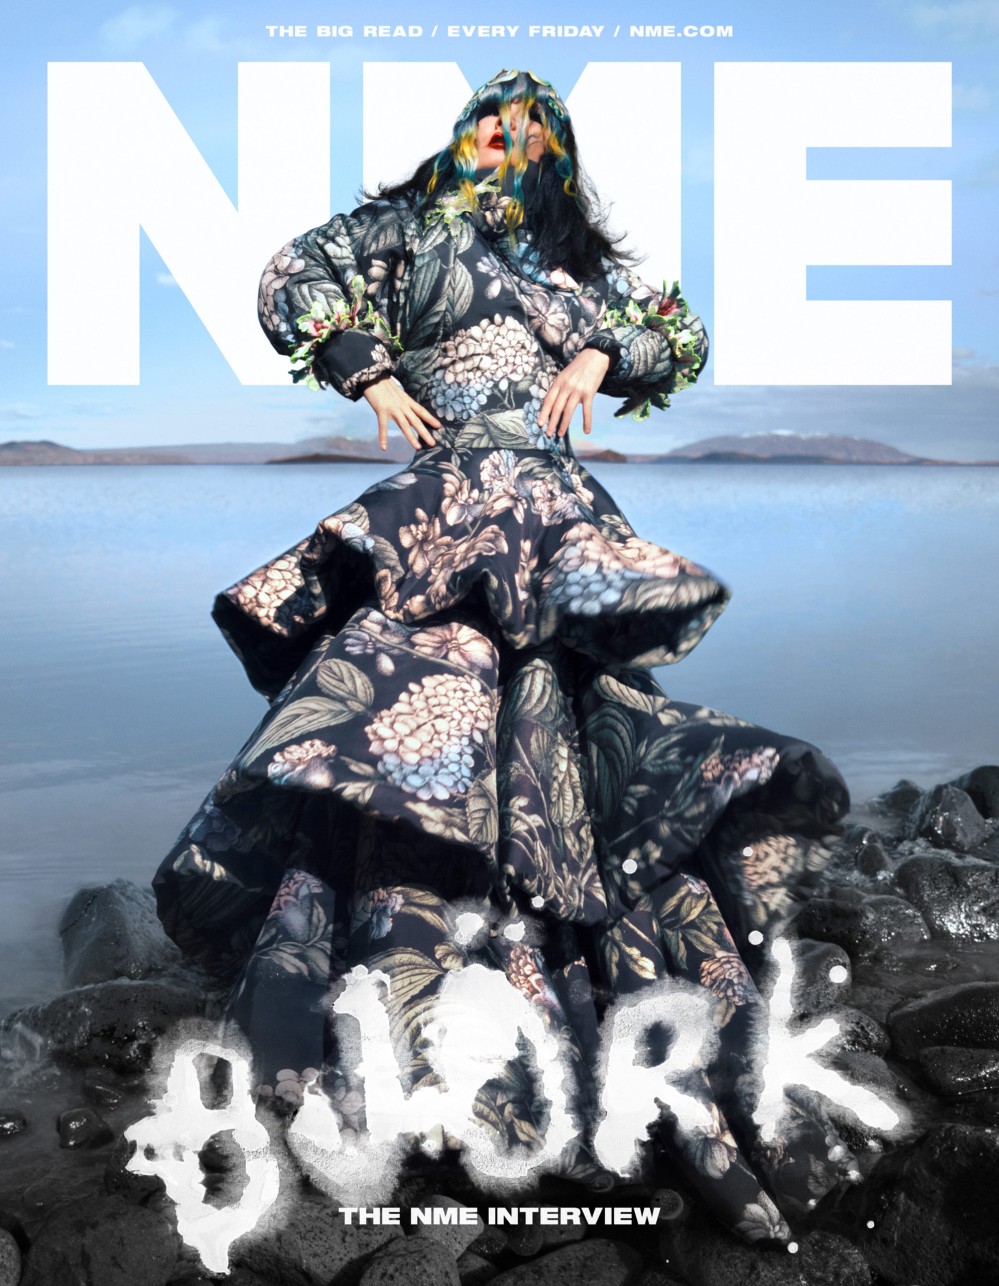 Björk on the cover of NME